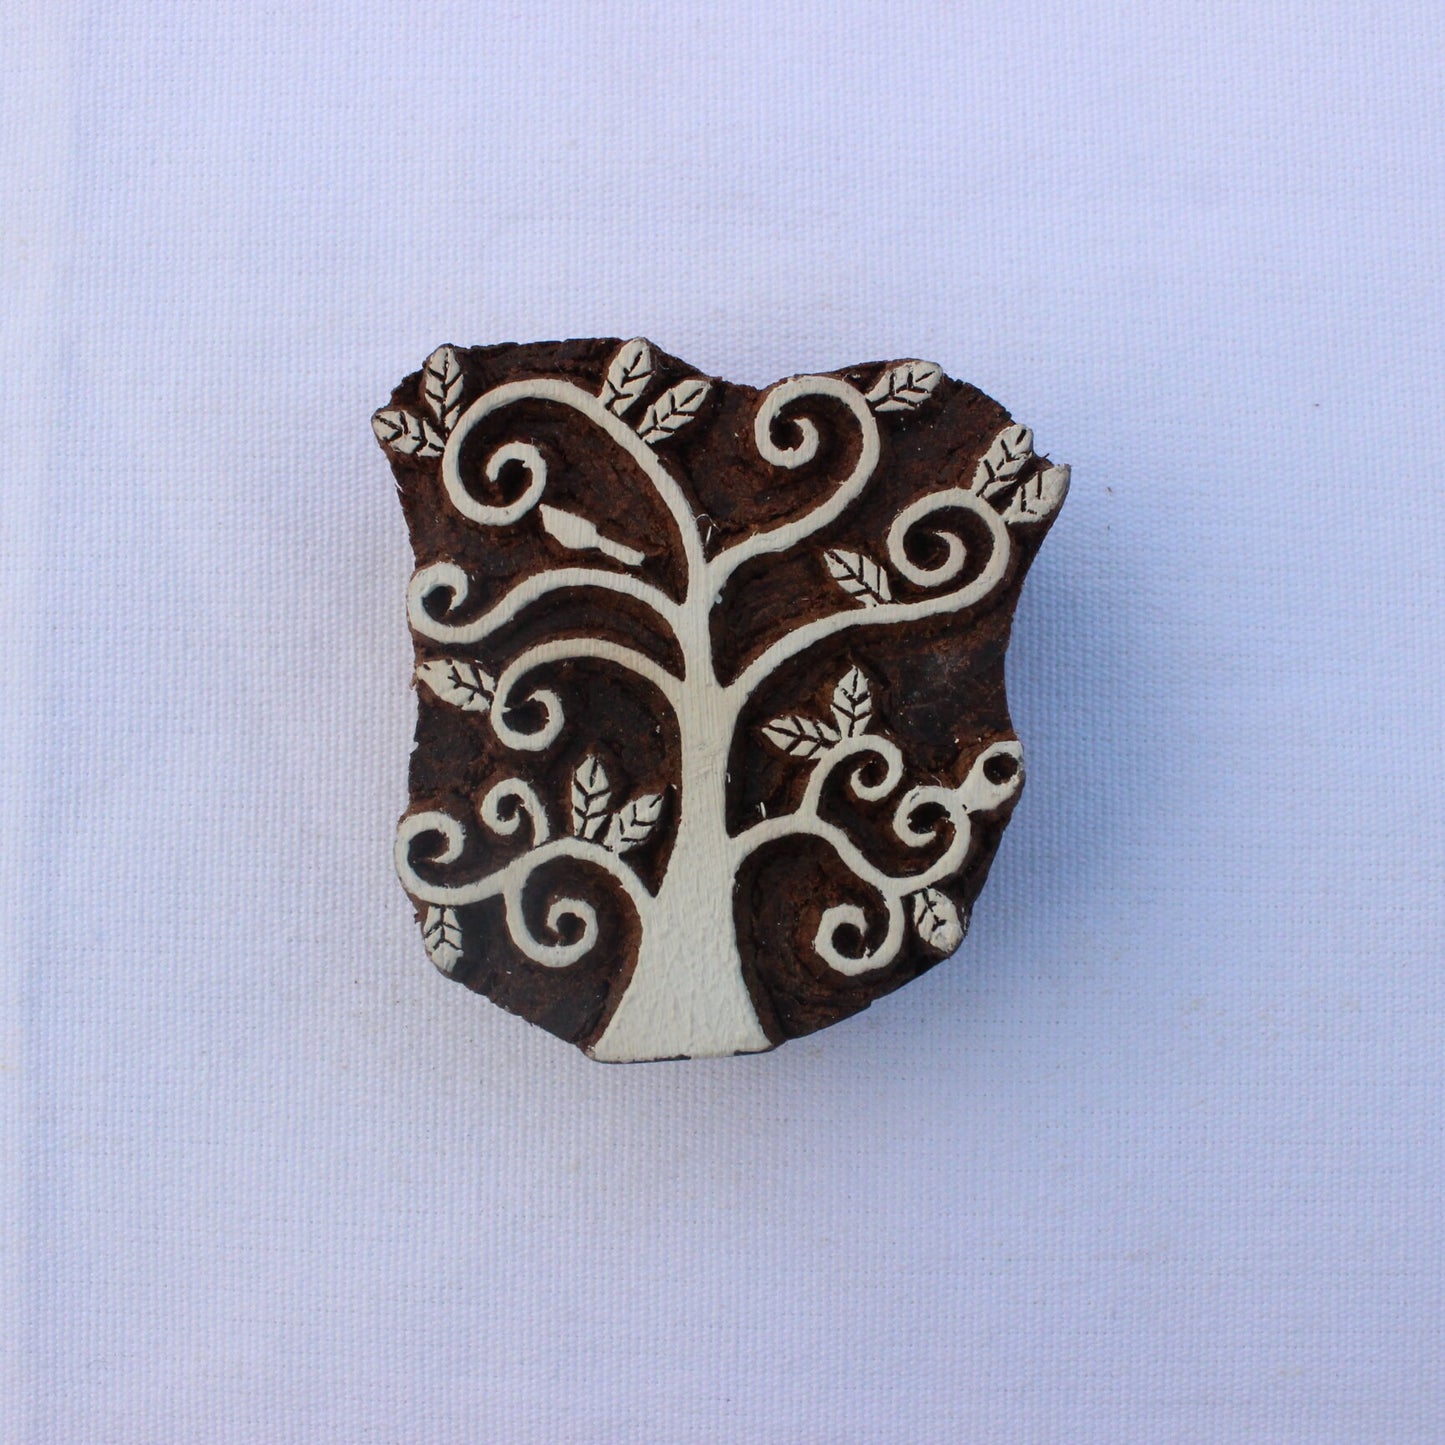 Tree Fabric Stamp Tree Of Life Block Print Stamp Indian Fabric Stamp Hand Carved Textile Printing Block For Printing Kids Craft Soap Stamp